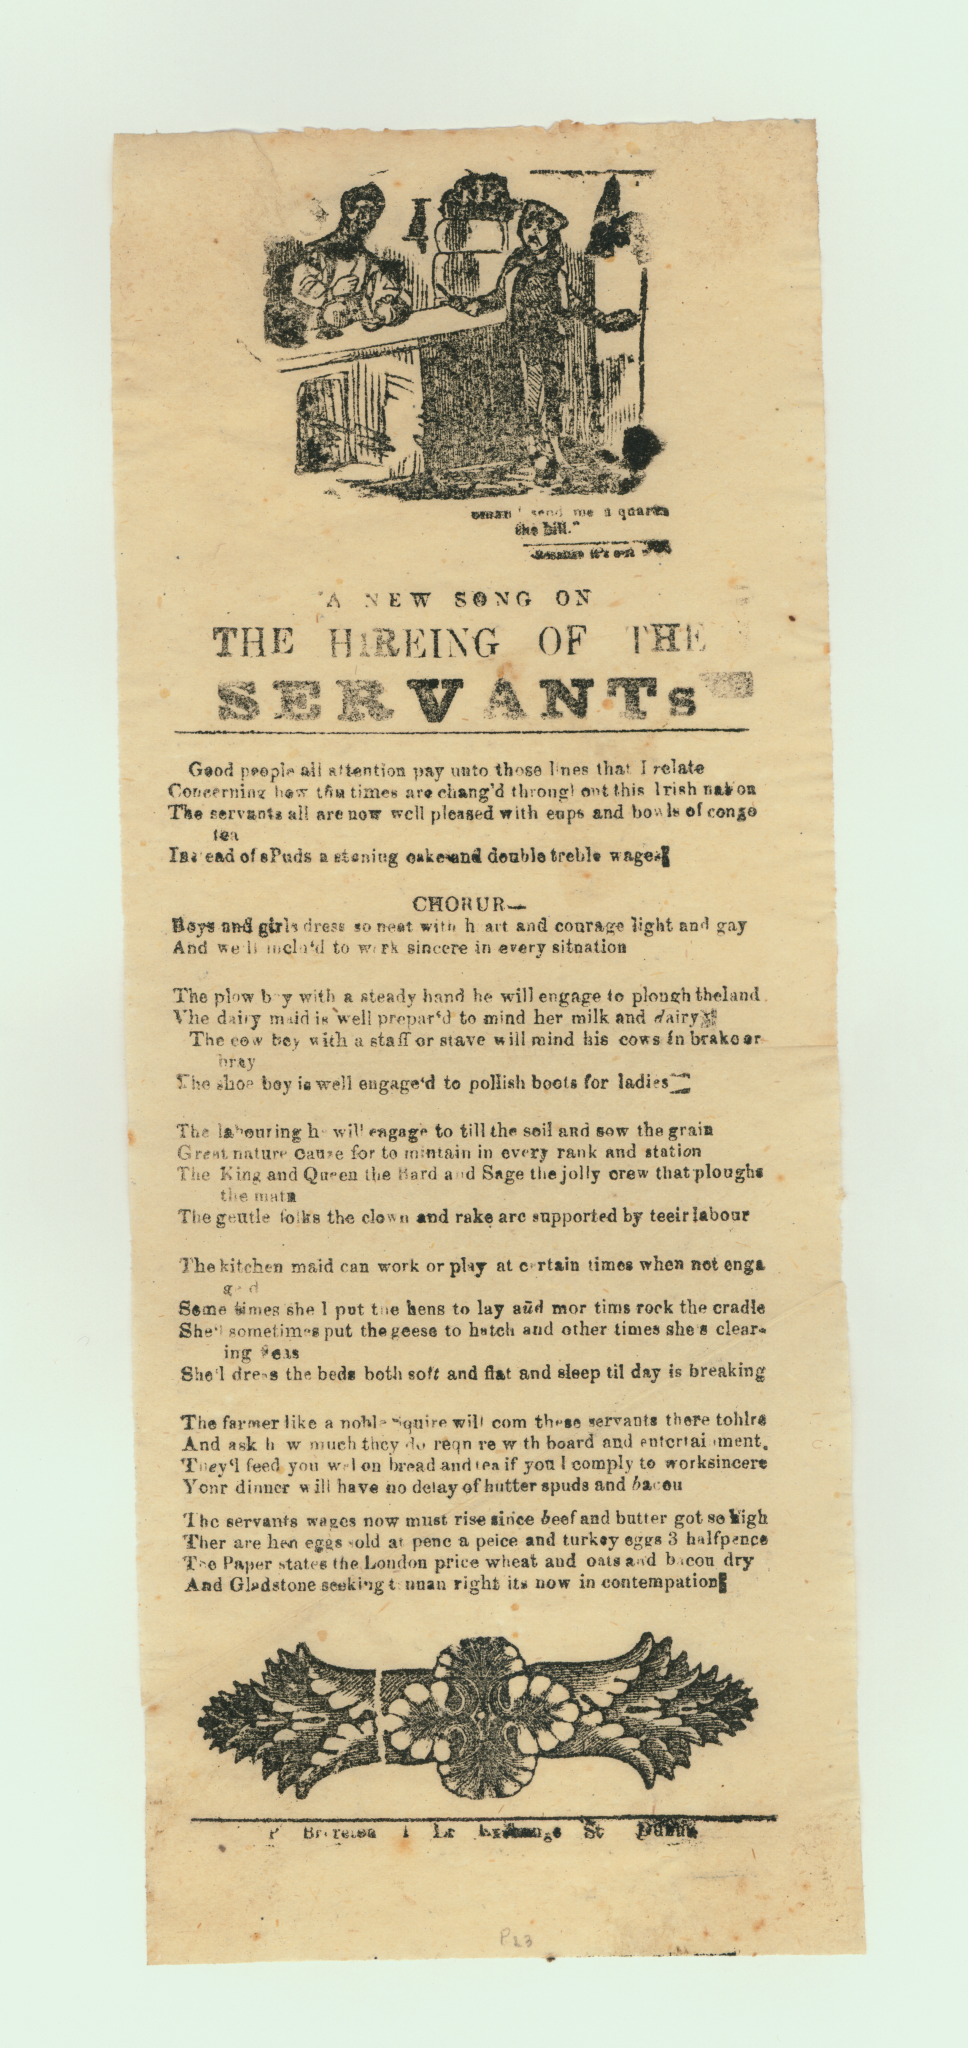 &quot;A New Song on the Hiring of the Servants&quot;